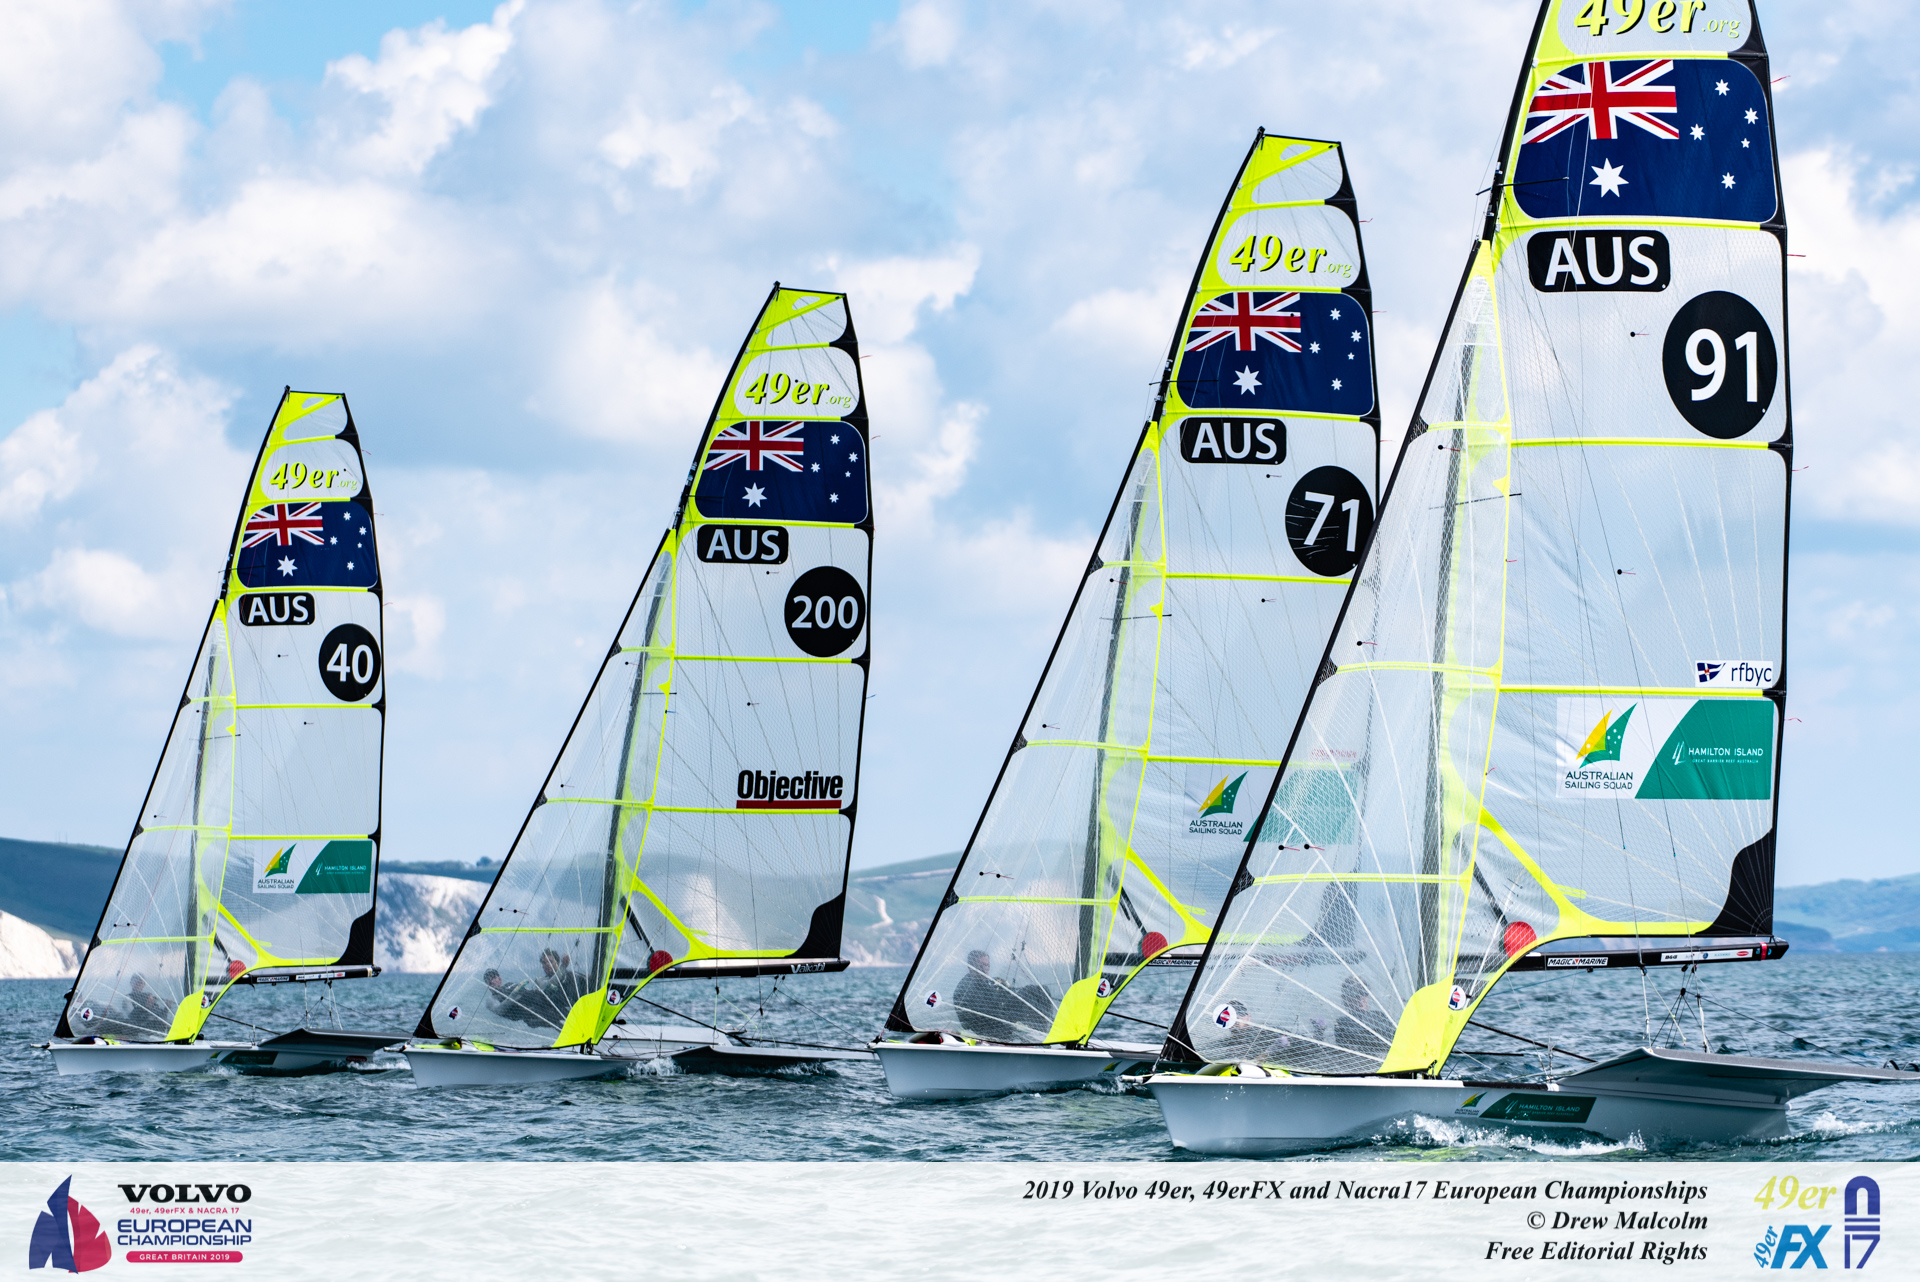 Phillips brothers keep momentum going at 49er Europeans in Weymouth